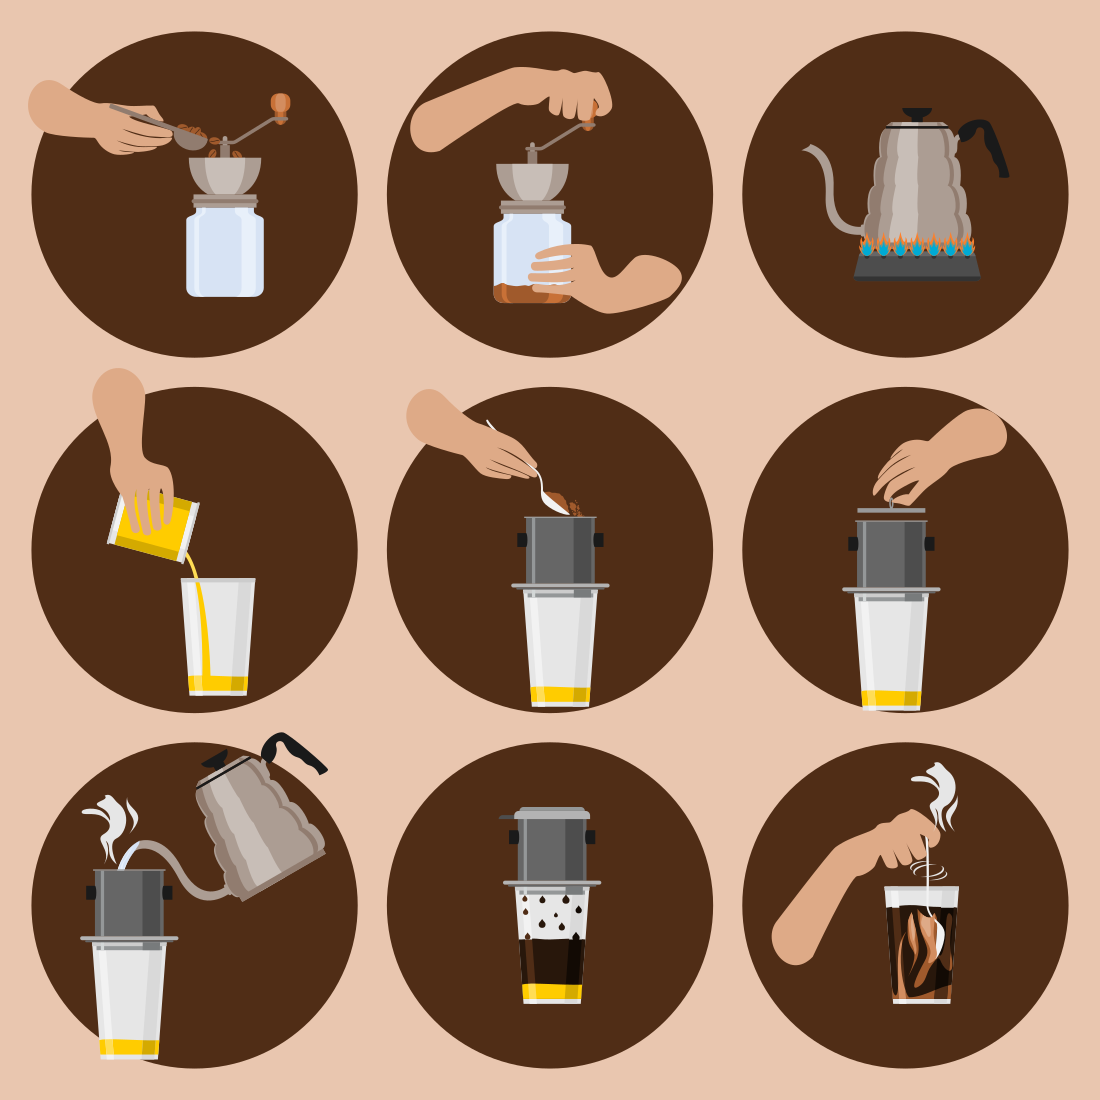 Vietnamese Coffee Drip Instruction Vector Illustration Icons Set cover image.